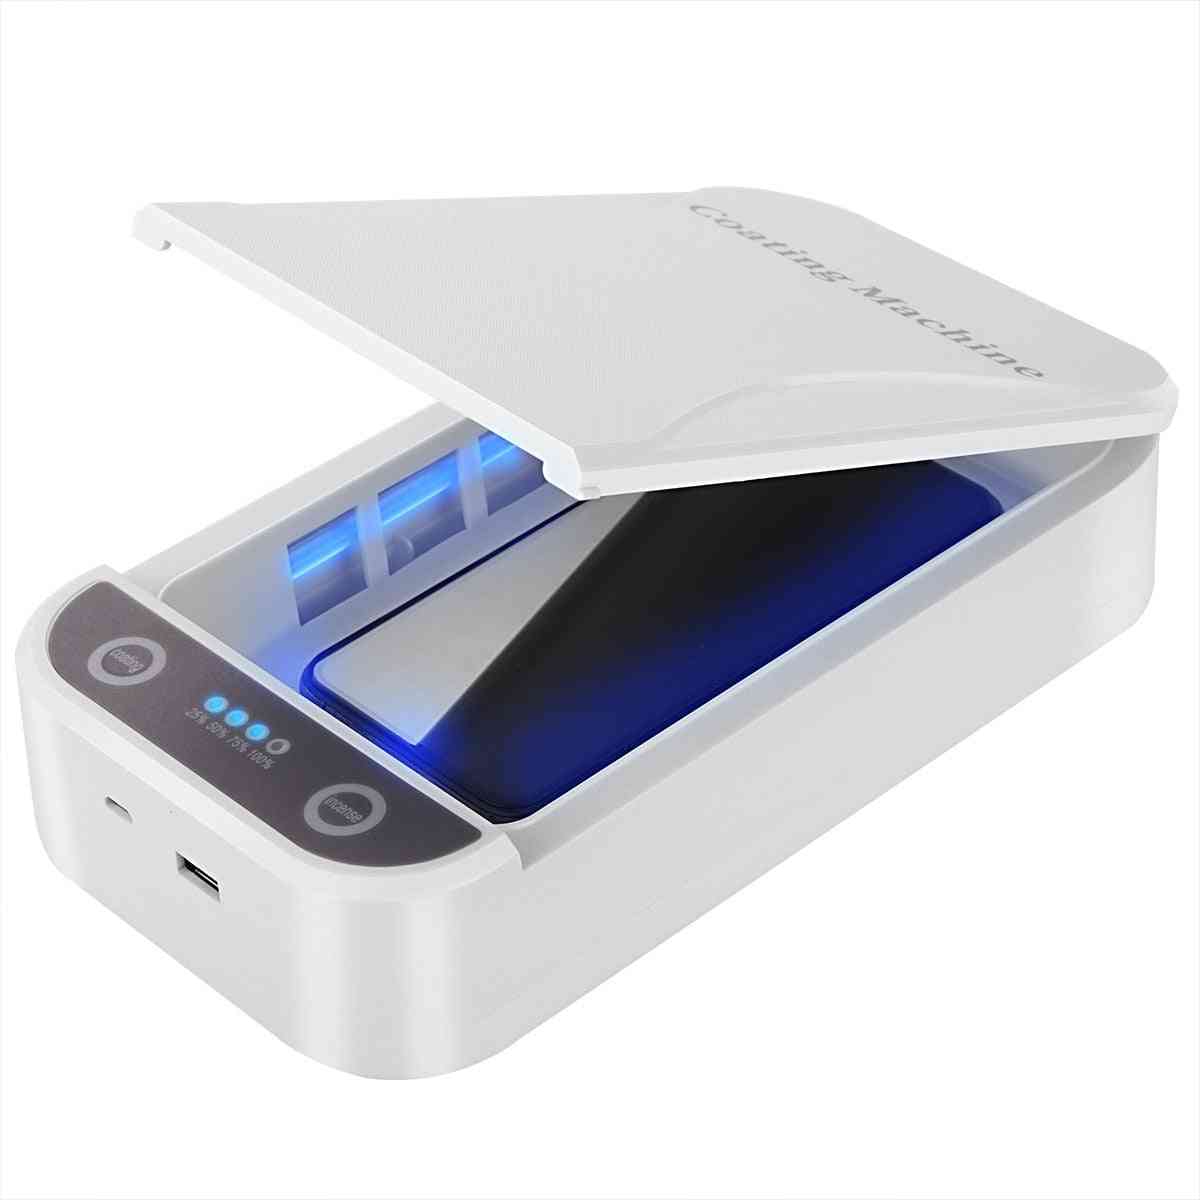 Dual Uv-light Sterilizer Box, Jewelry, Phones, Cleaner Case With Usb Cable